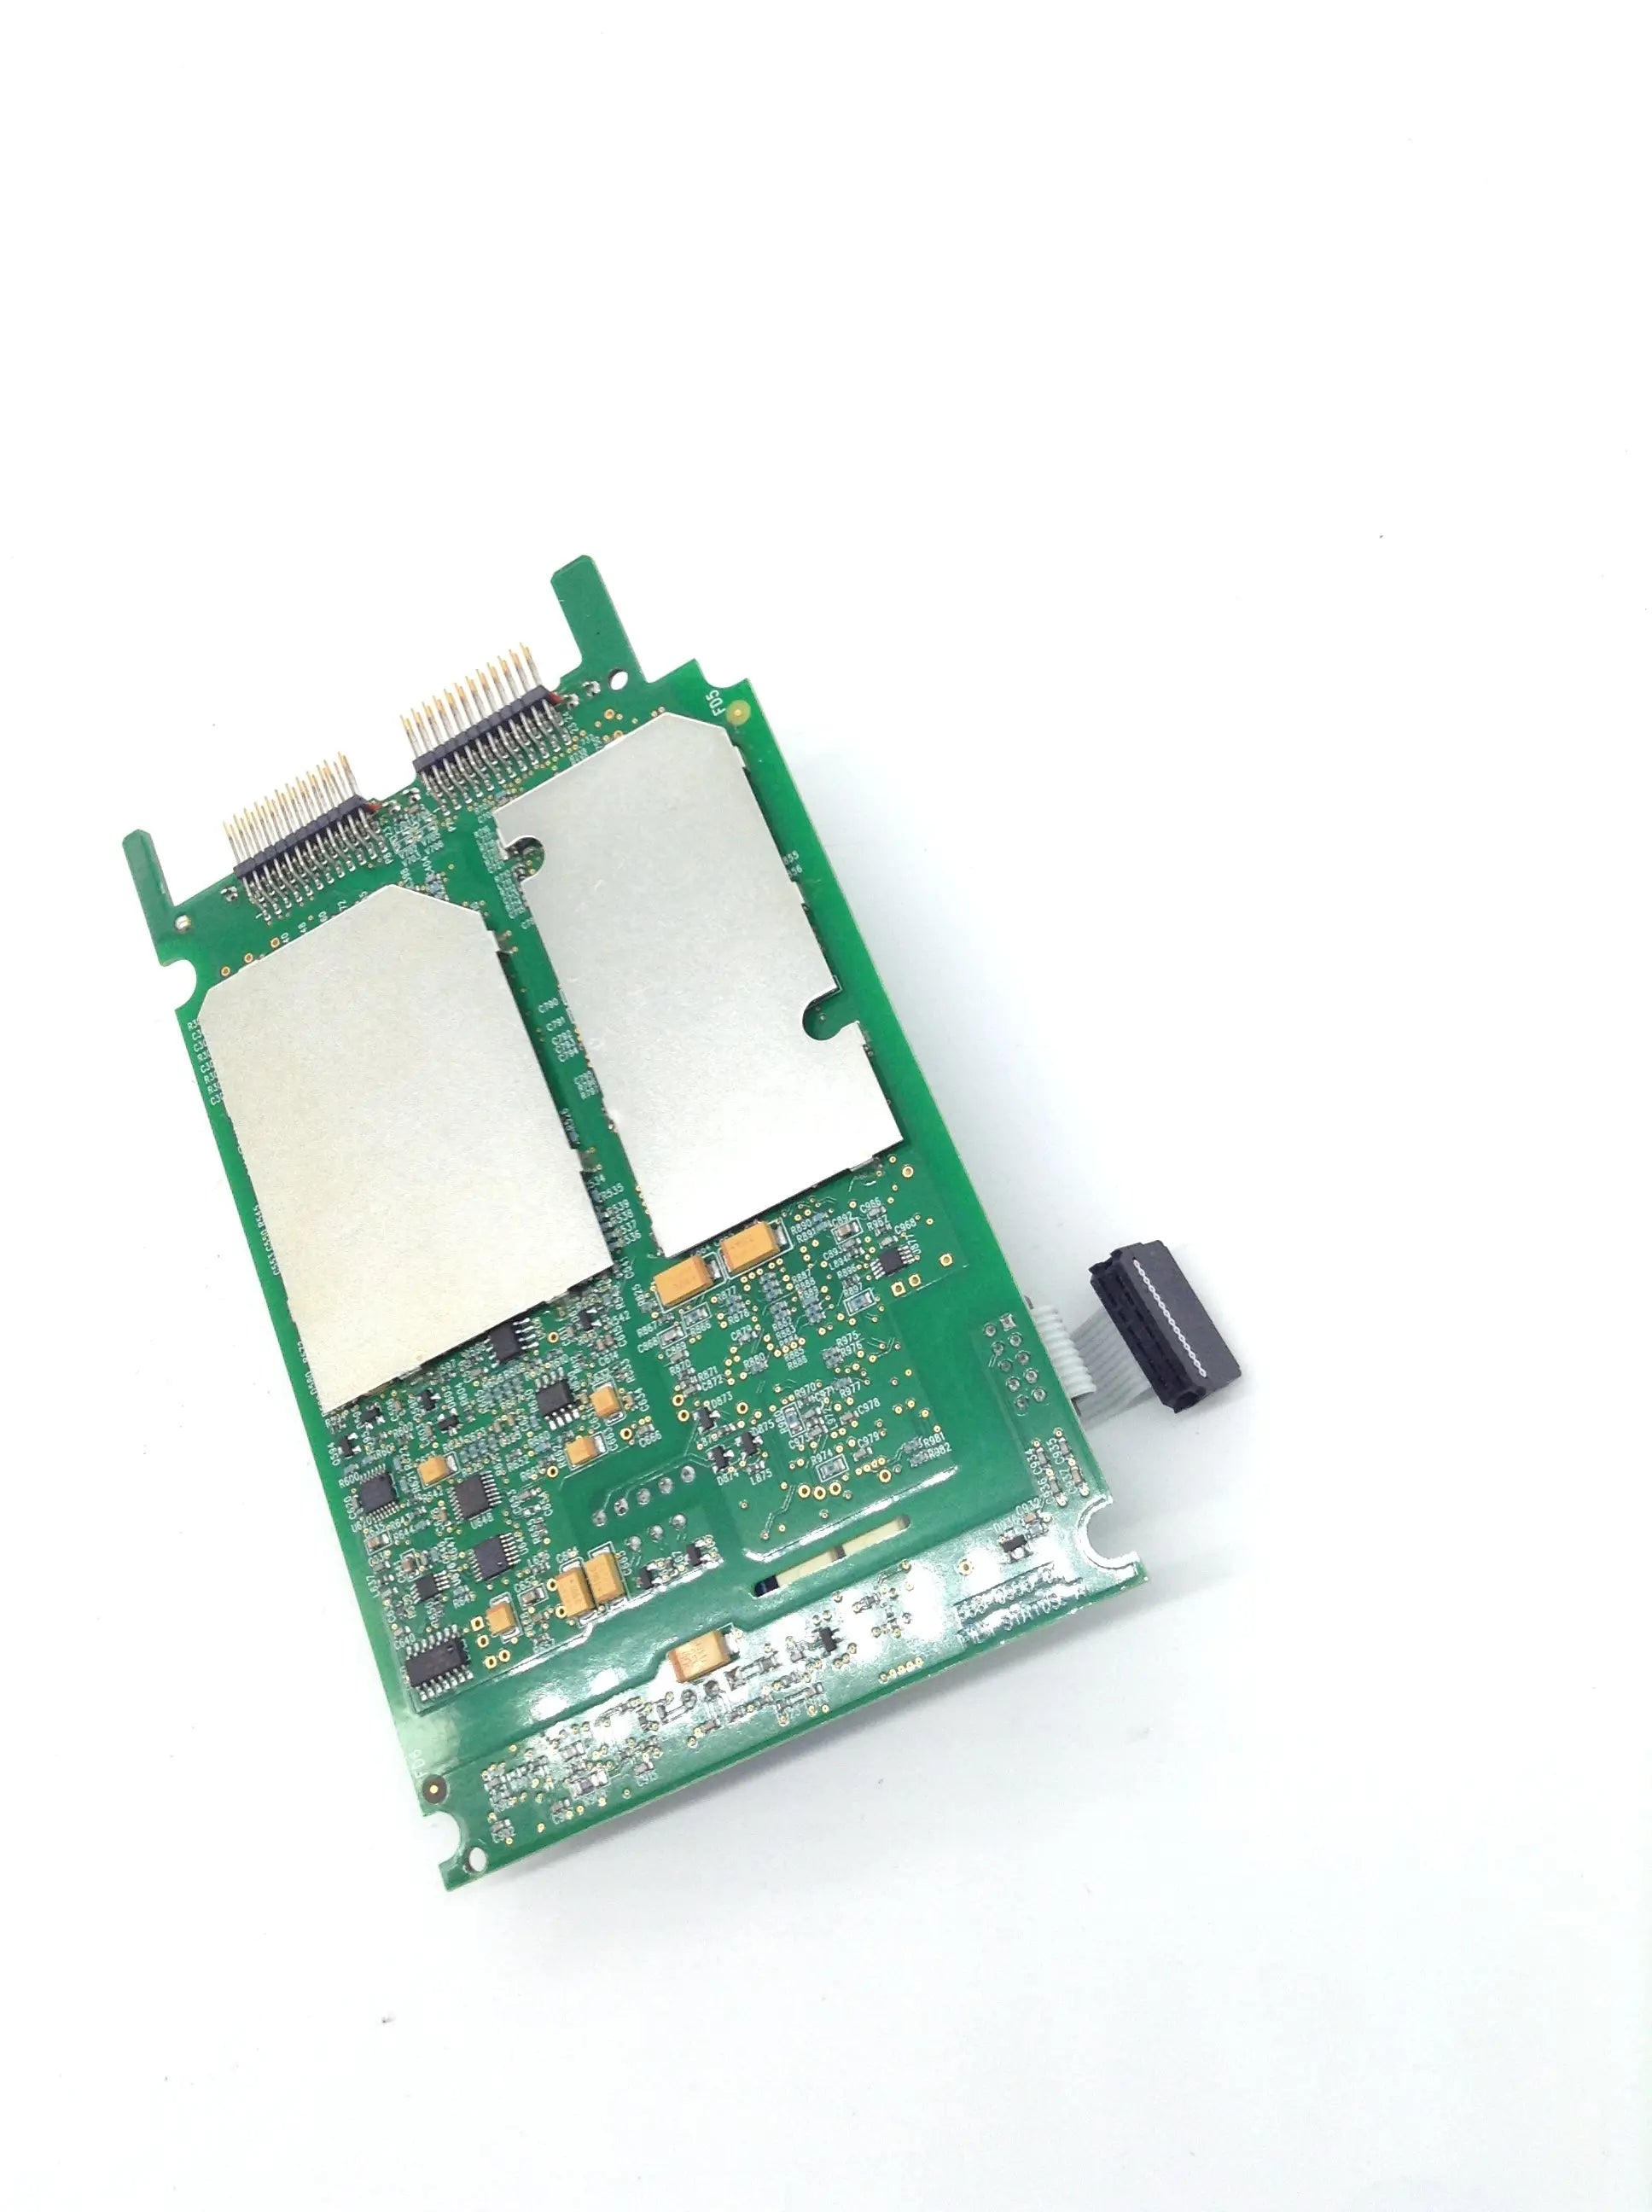 Load image into Gallery viewer, A Biomedical Service Spacelabs MPC860 CPU/NIBP ASSEMBLY BOARD 0320-0324 670-0842-01 670-0882-01 